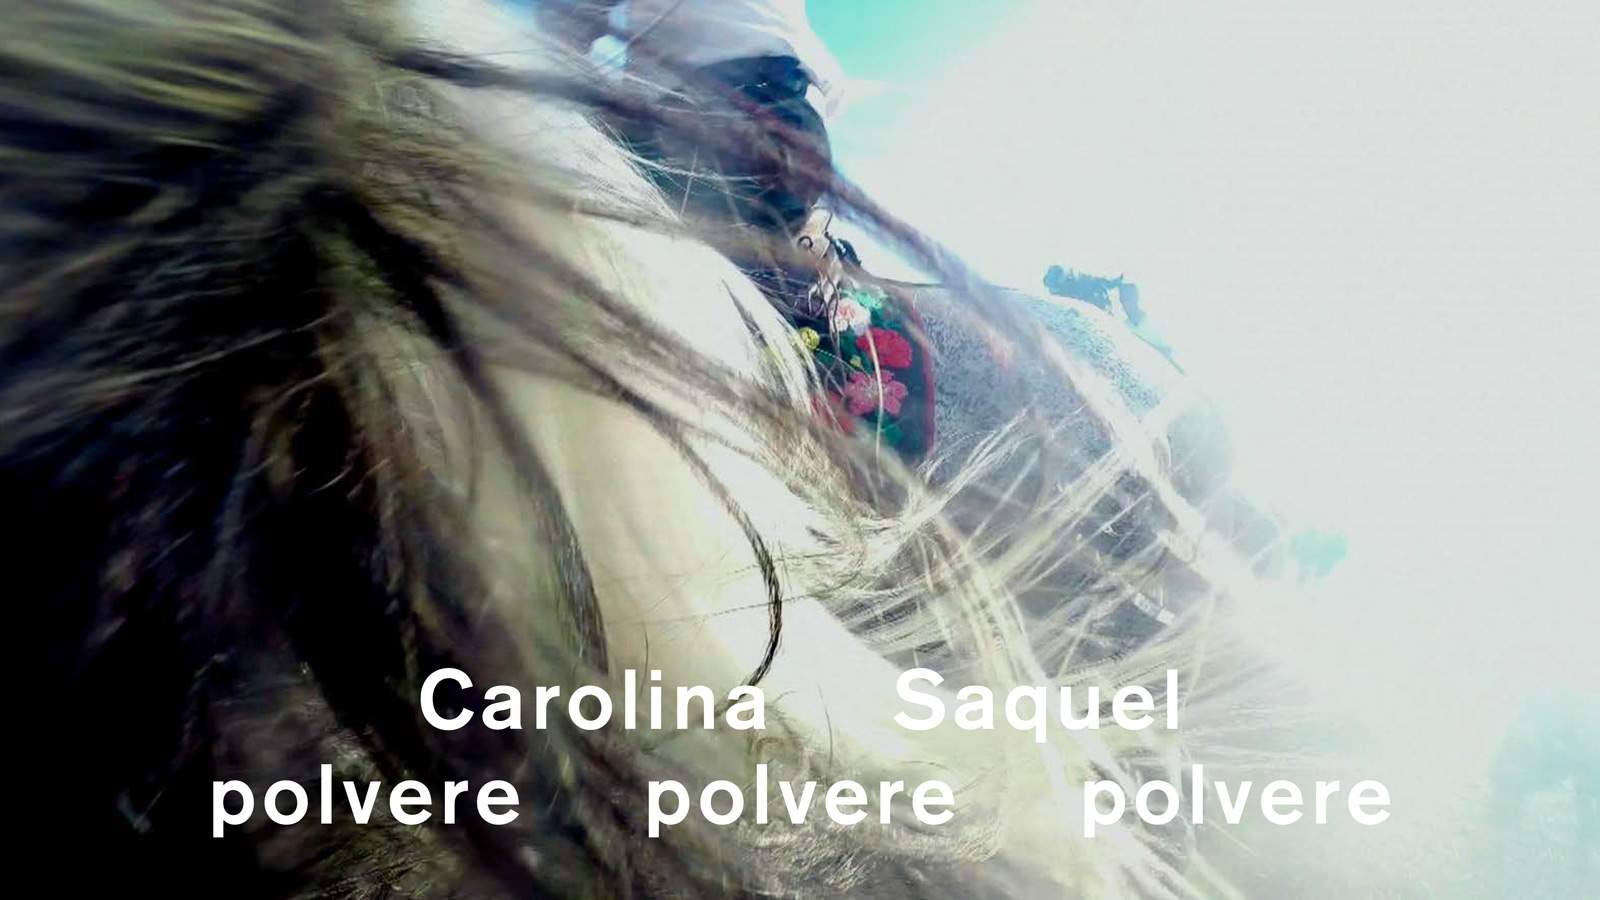 At the National Gallery in Rome the project polvere polvere, solo exhibition of Carolina Saquel